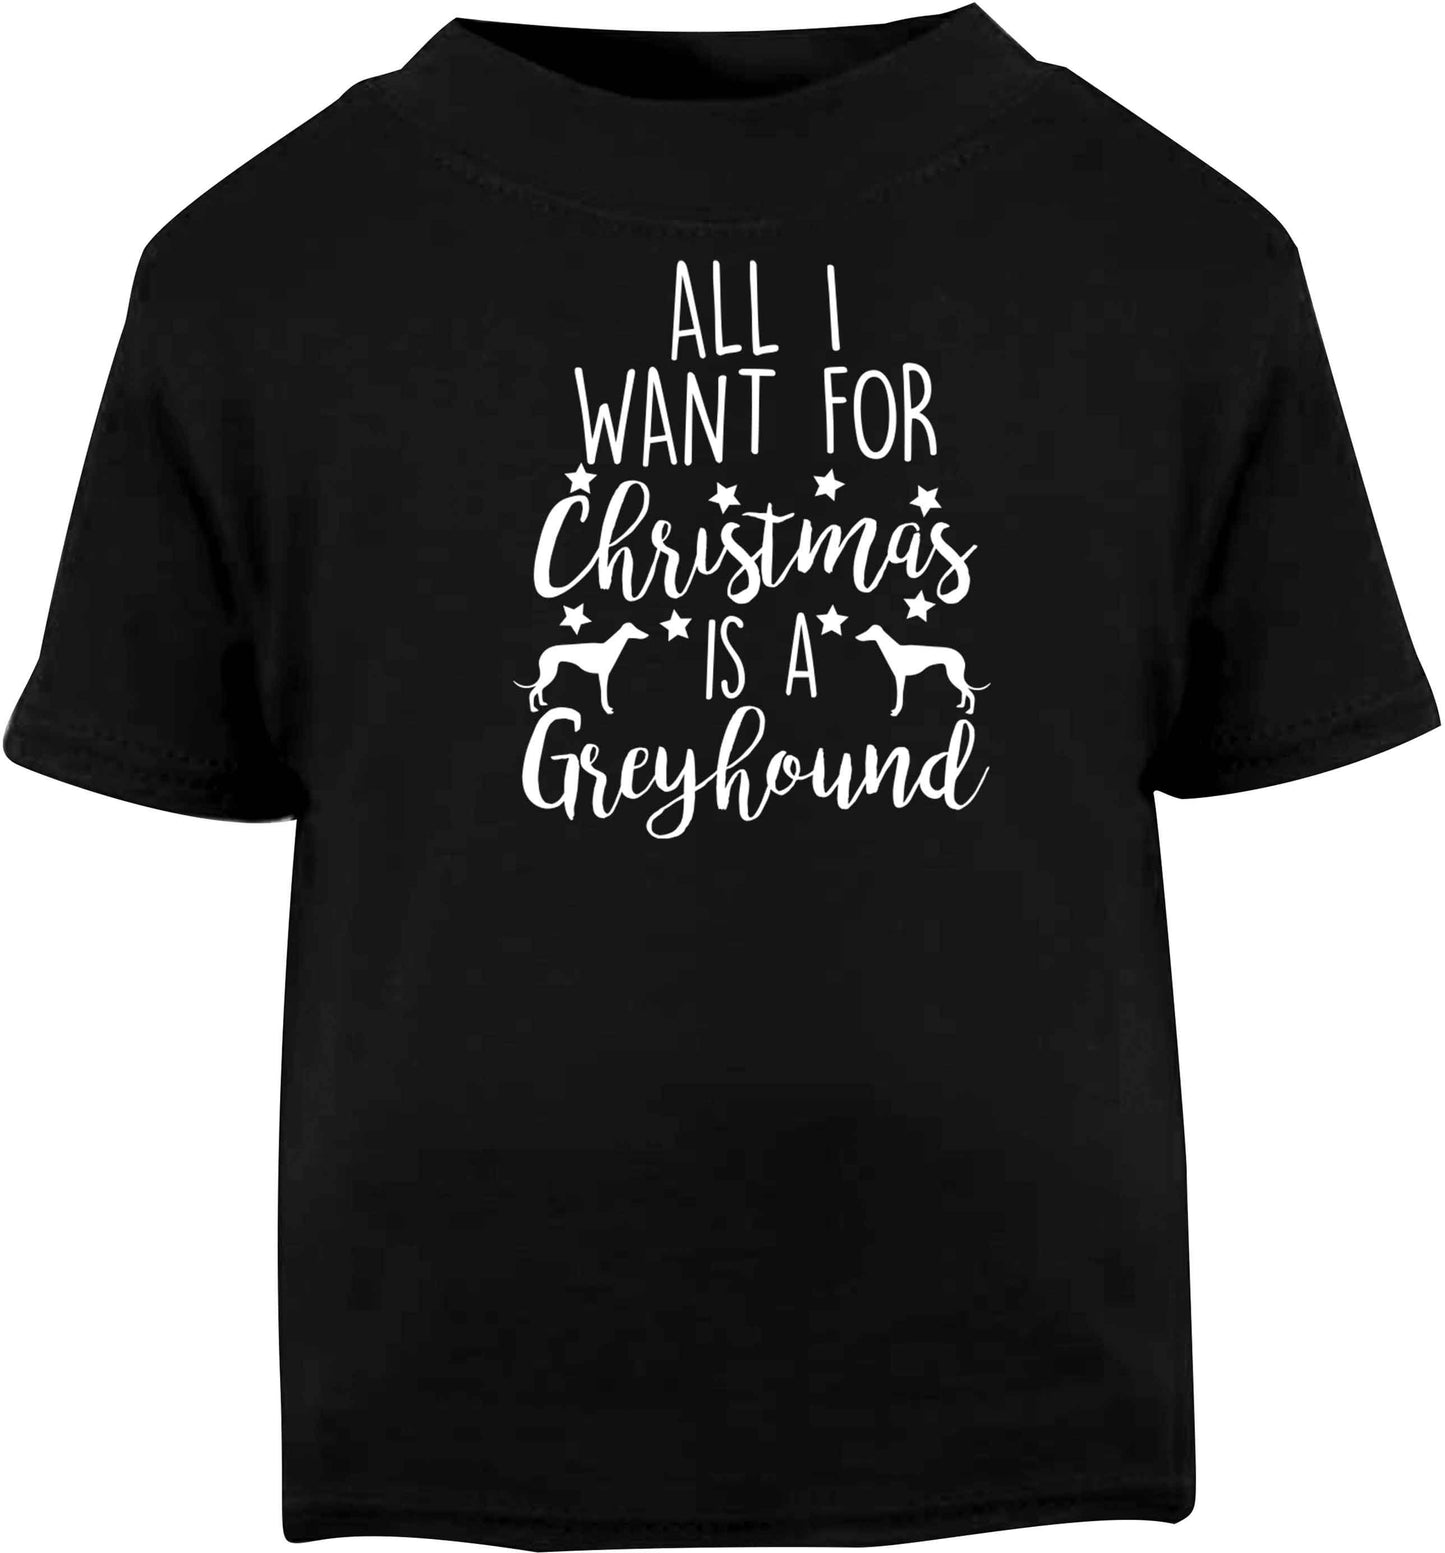 All I want for Christmas is a greyhound Black baby toddler Tshirt 2 years